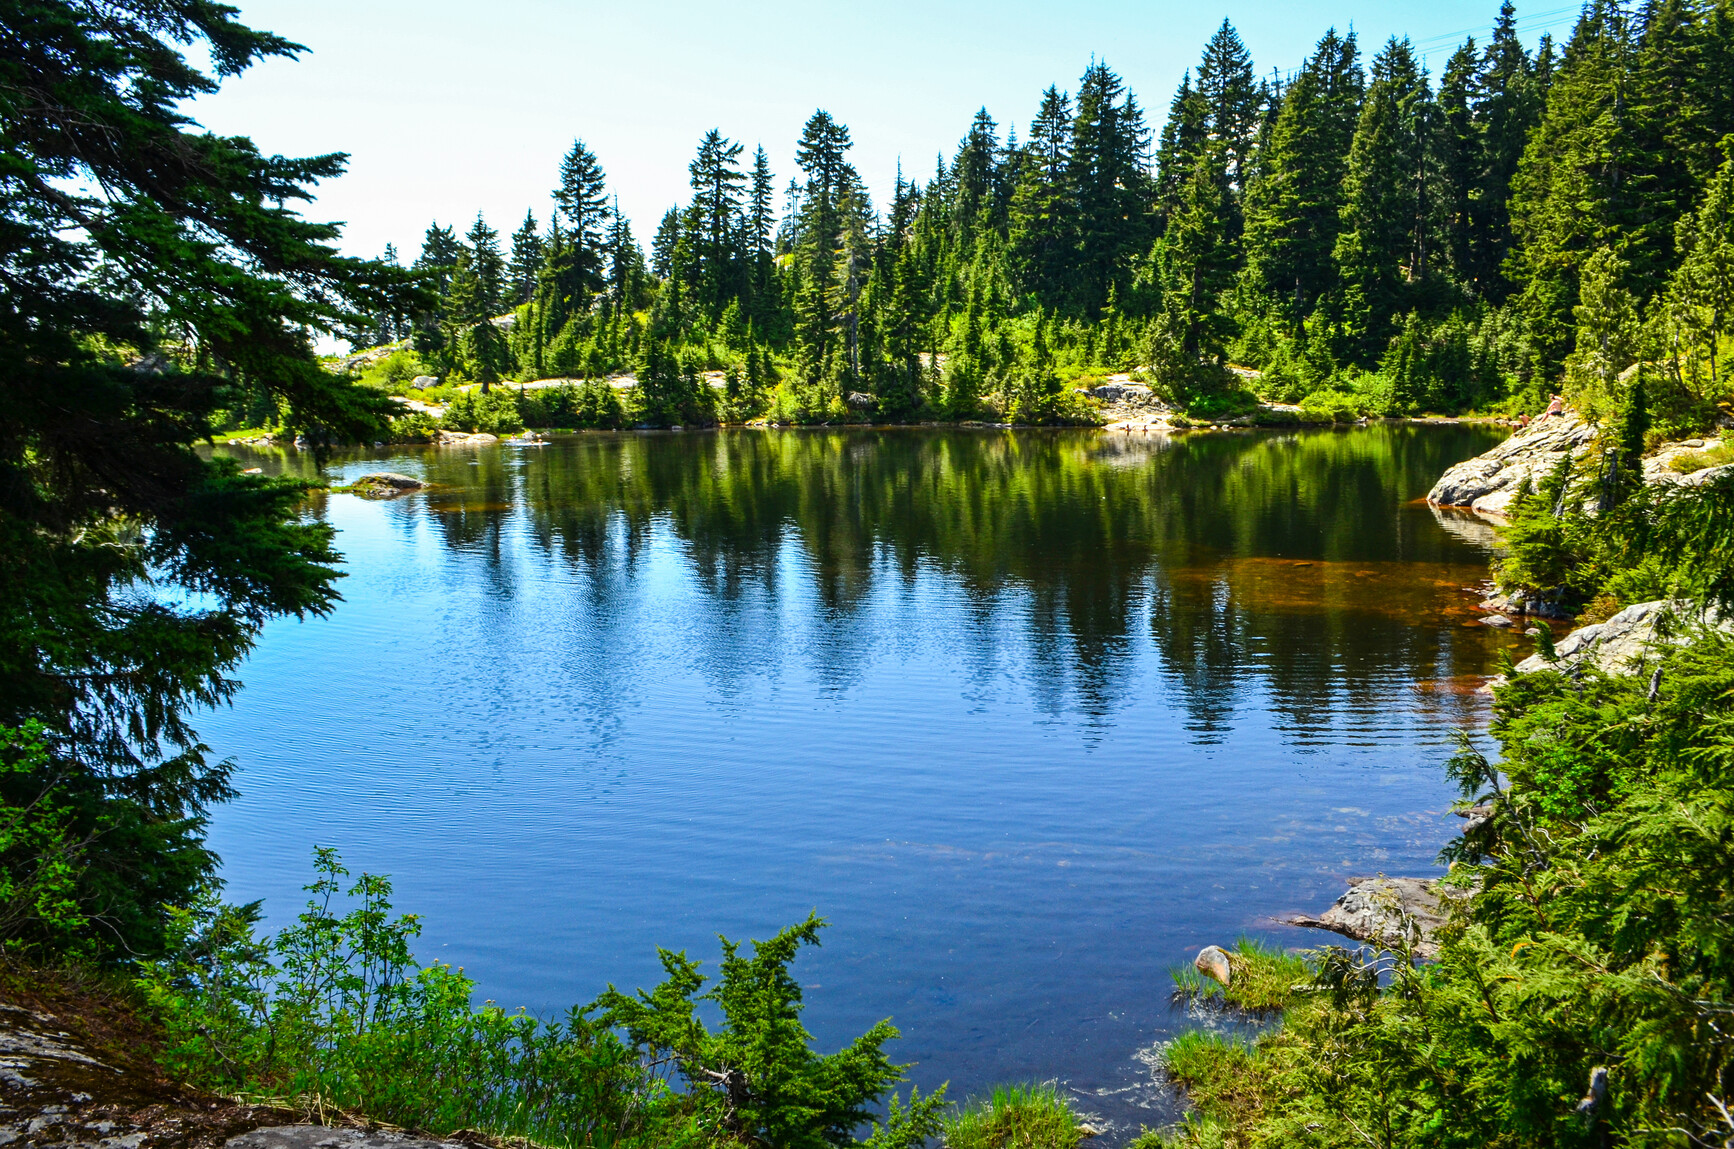 View of one of the lakes in Mount Seymour Park. The shore is lined with rocky outcrops and forest.